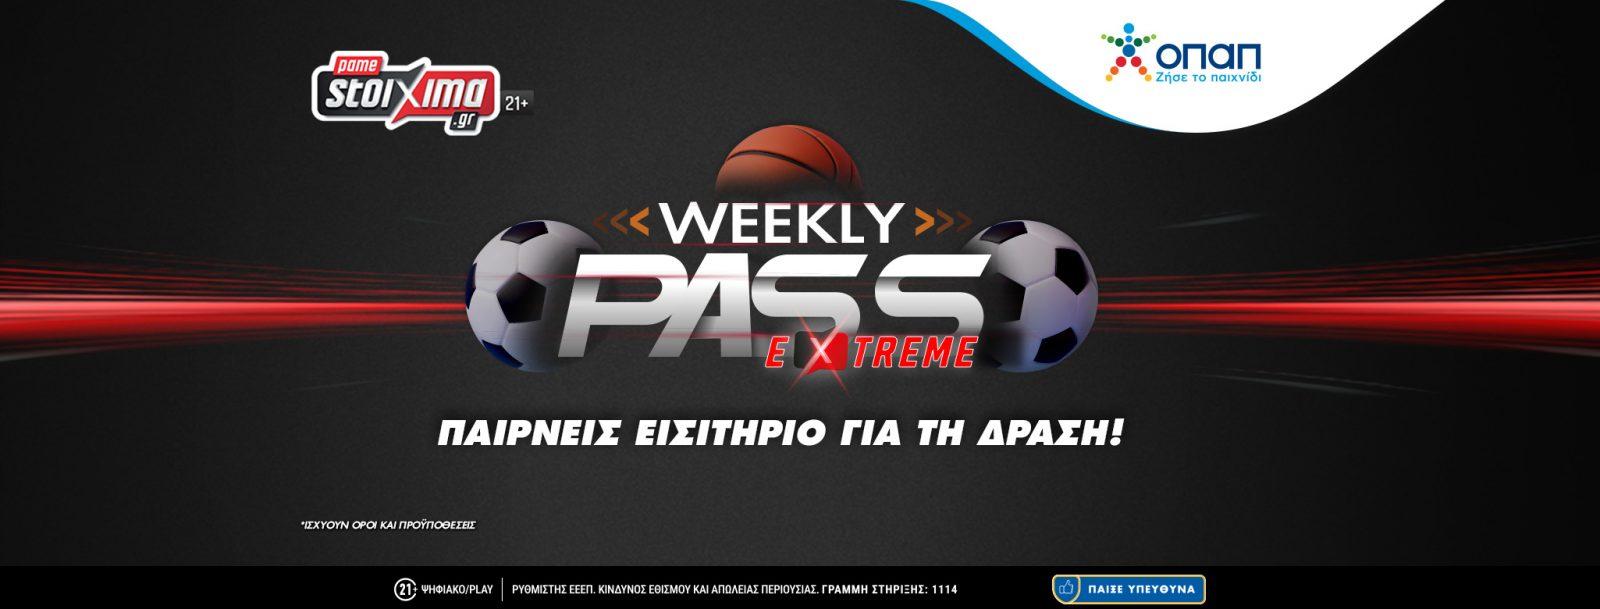 Champions League με 0% γκανιότα** και Weekly Pass Extreme